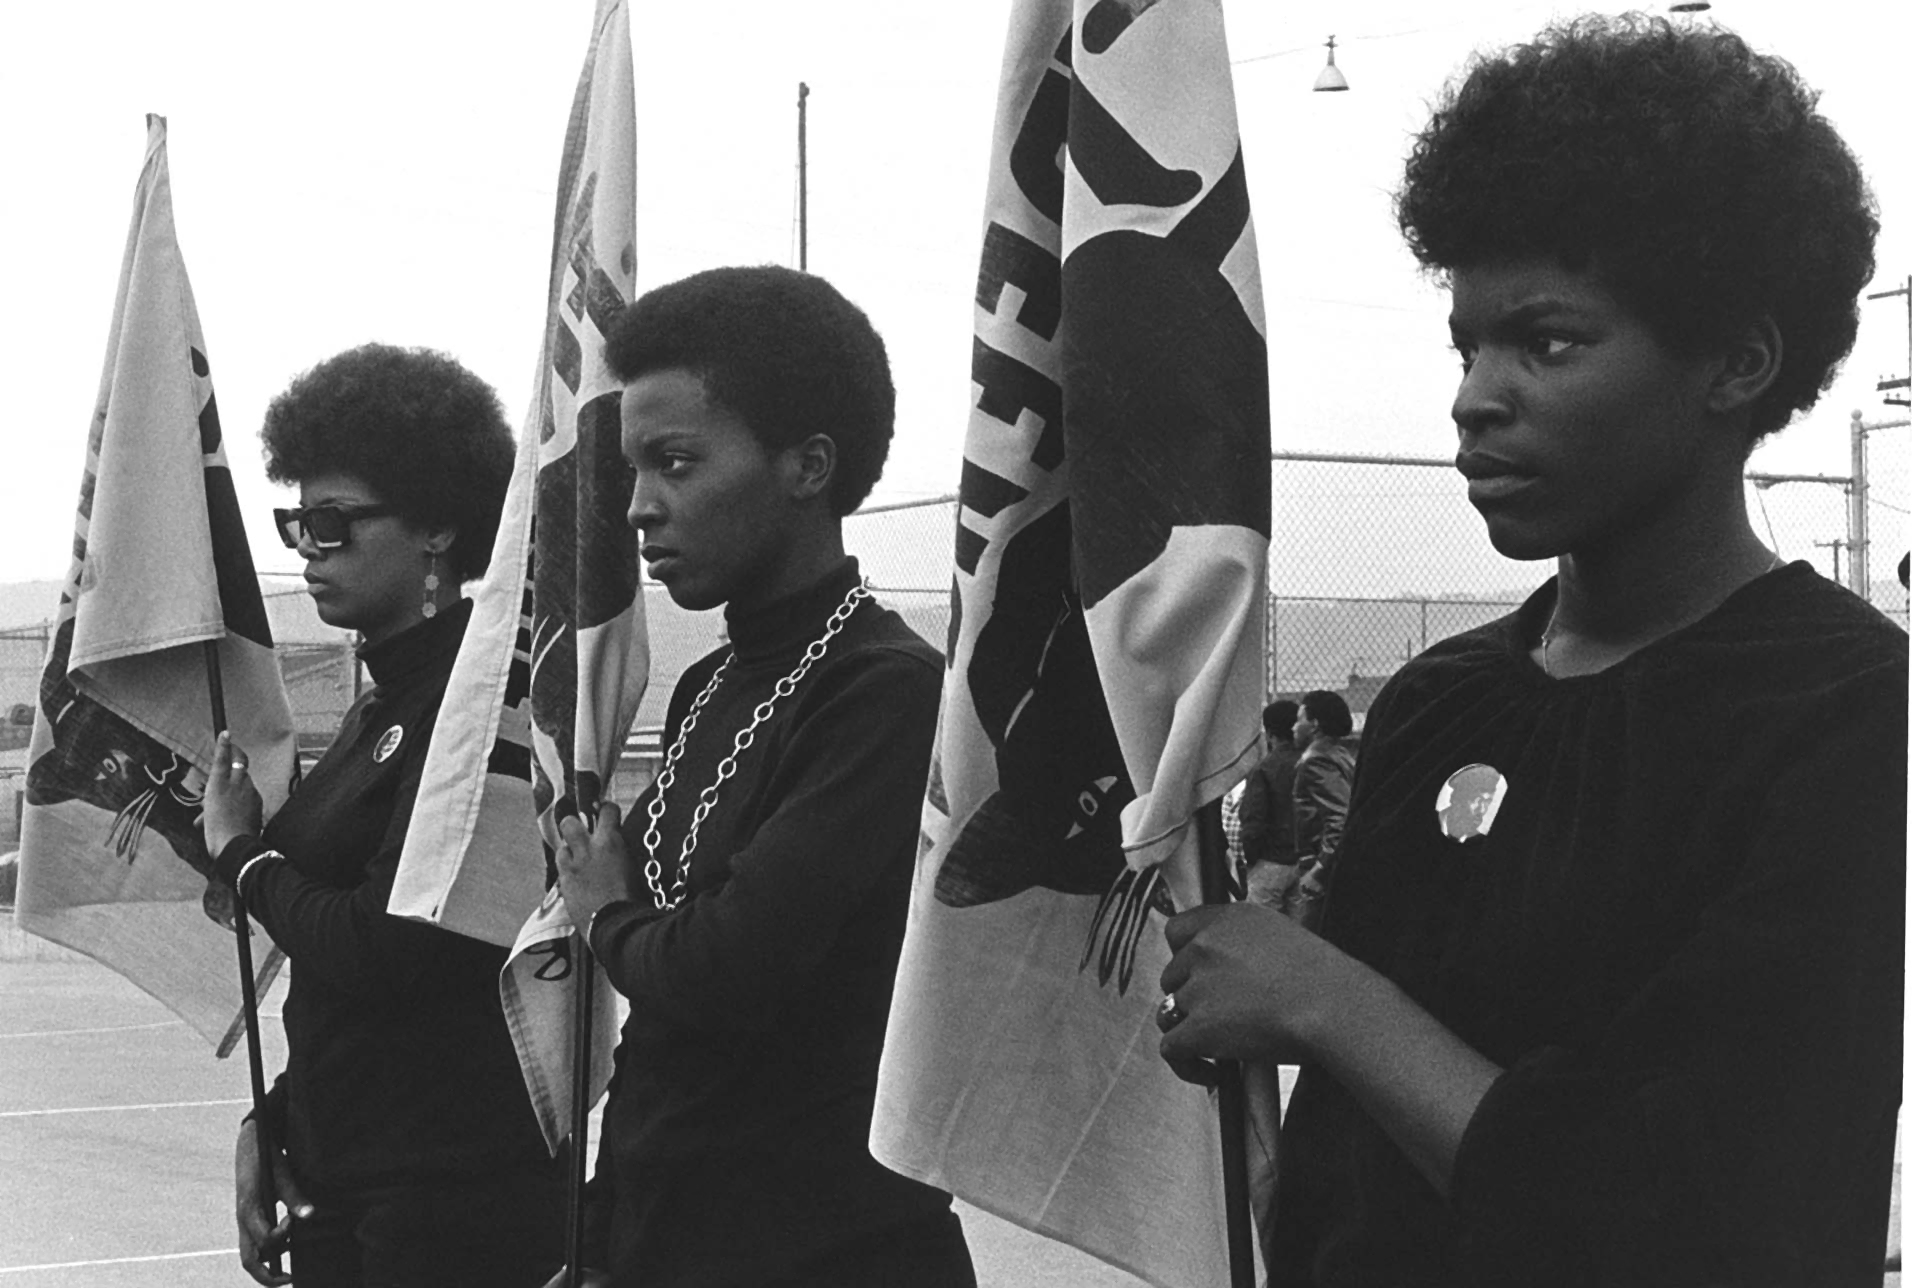 <h3>The Black Panthers</h3>